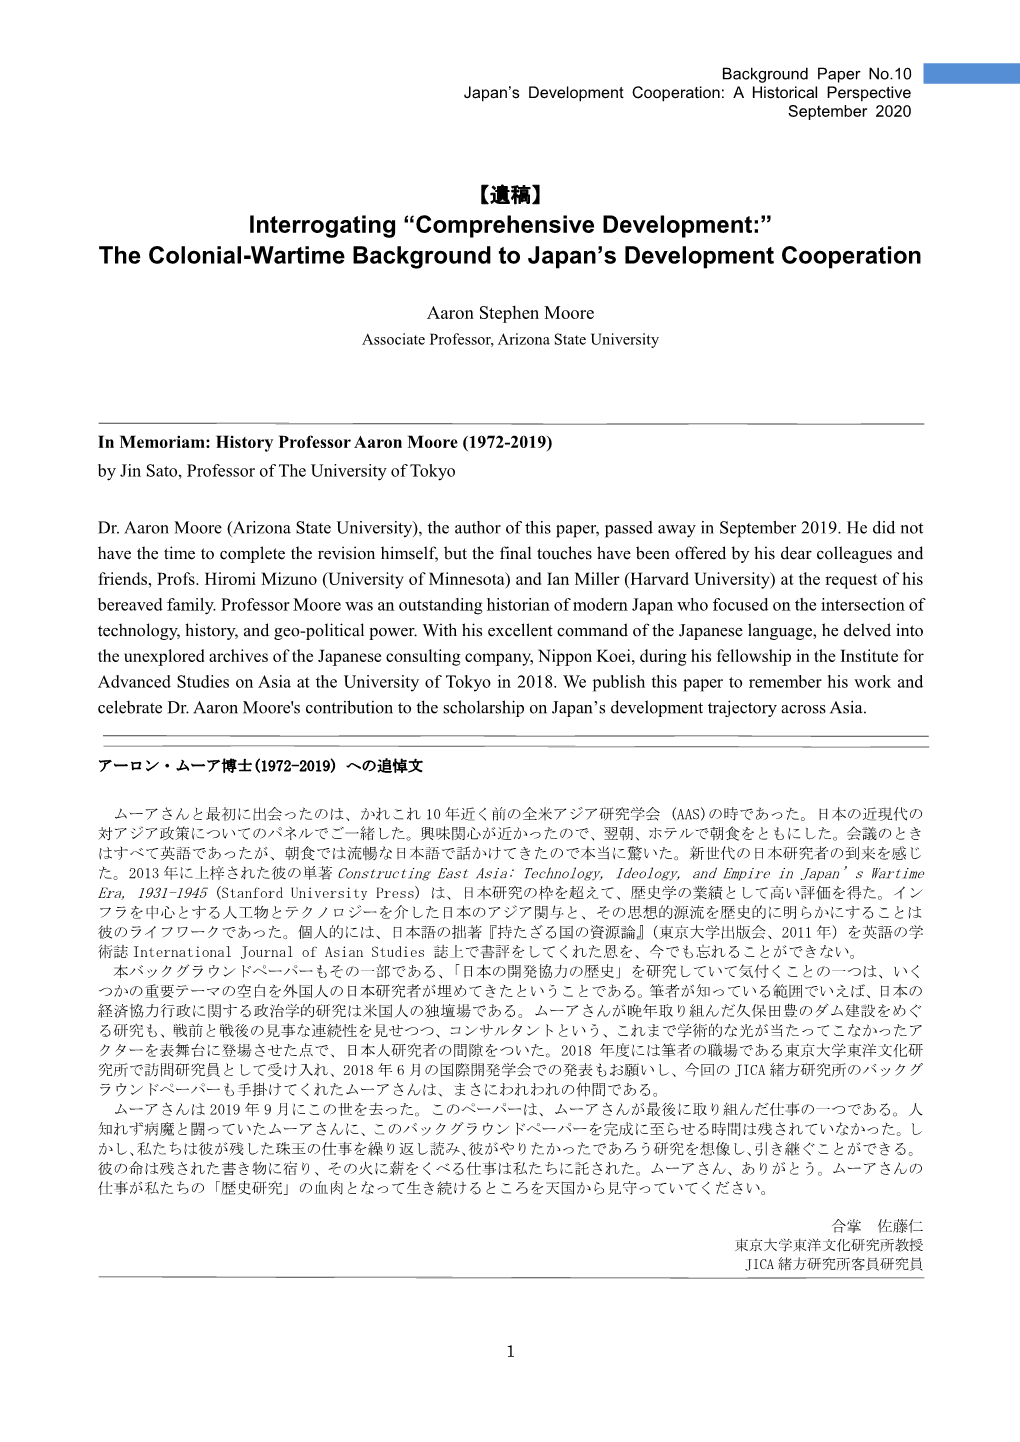 The Colonial-Wartime Background to Japan's Development Cooperation